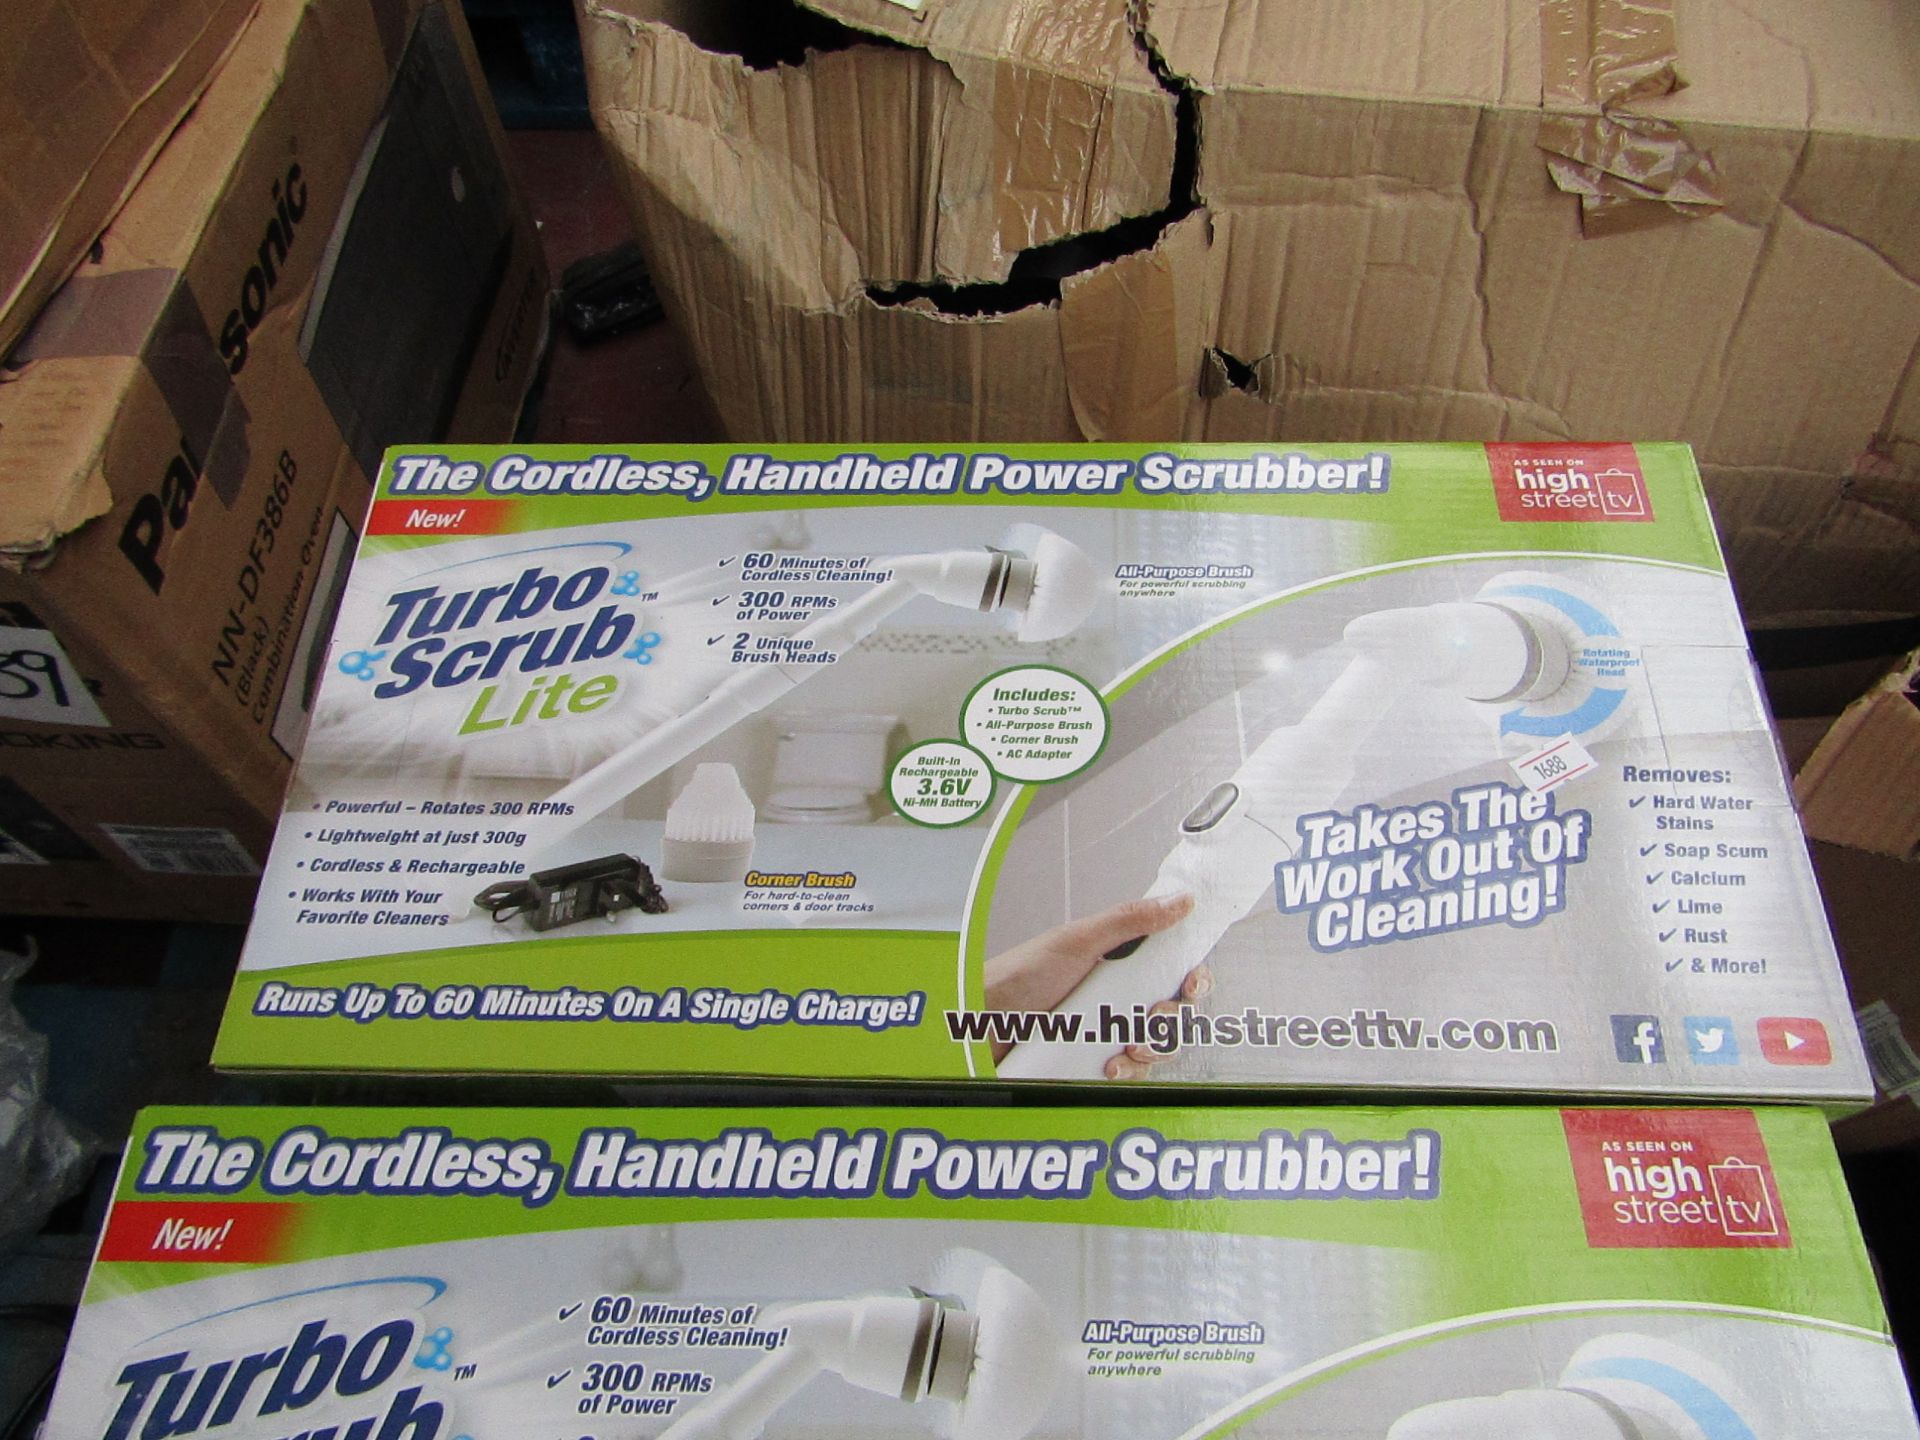 | 1X | TURBO SCRUB LITE CORDLESS HAND HELD POWER SCRUBBER | NEW AND BOXED | SKU C5060191467476 |